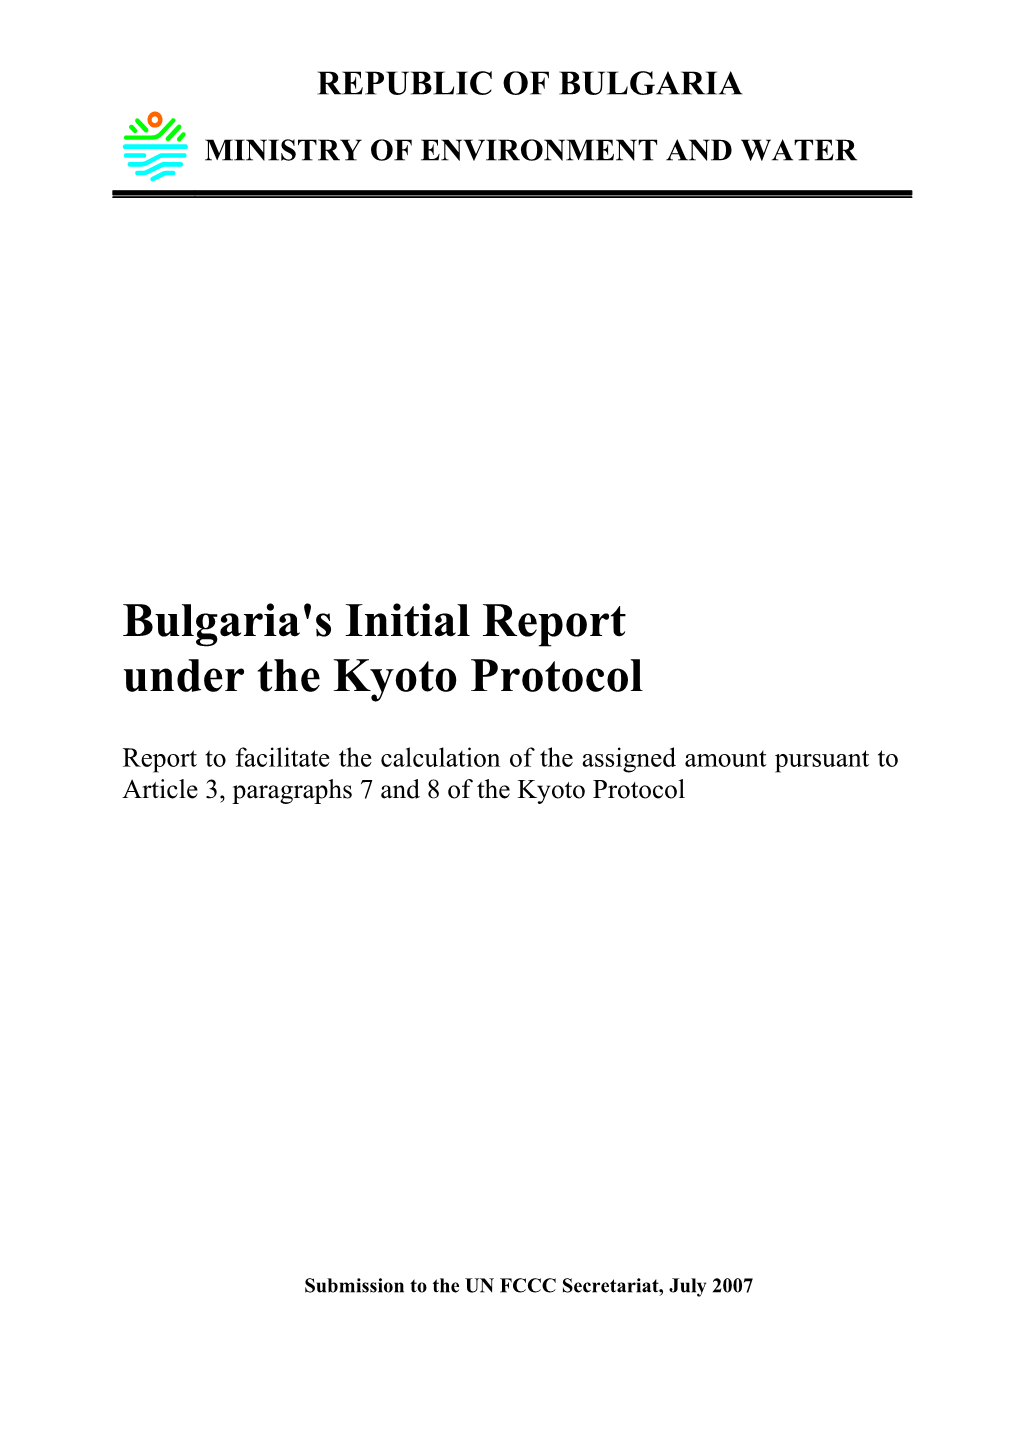 Report to Facilitate the Estimation of Bulgaria's Assigned Amount Under the Kyoto Protocol